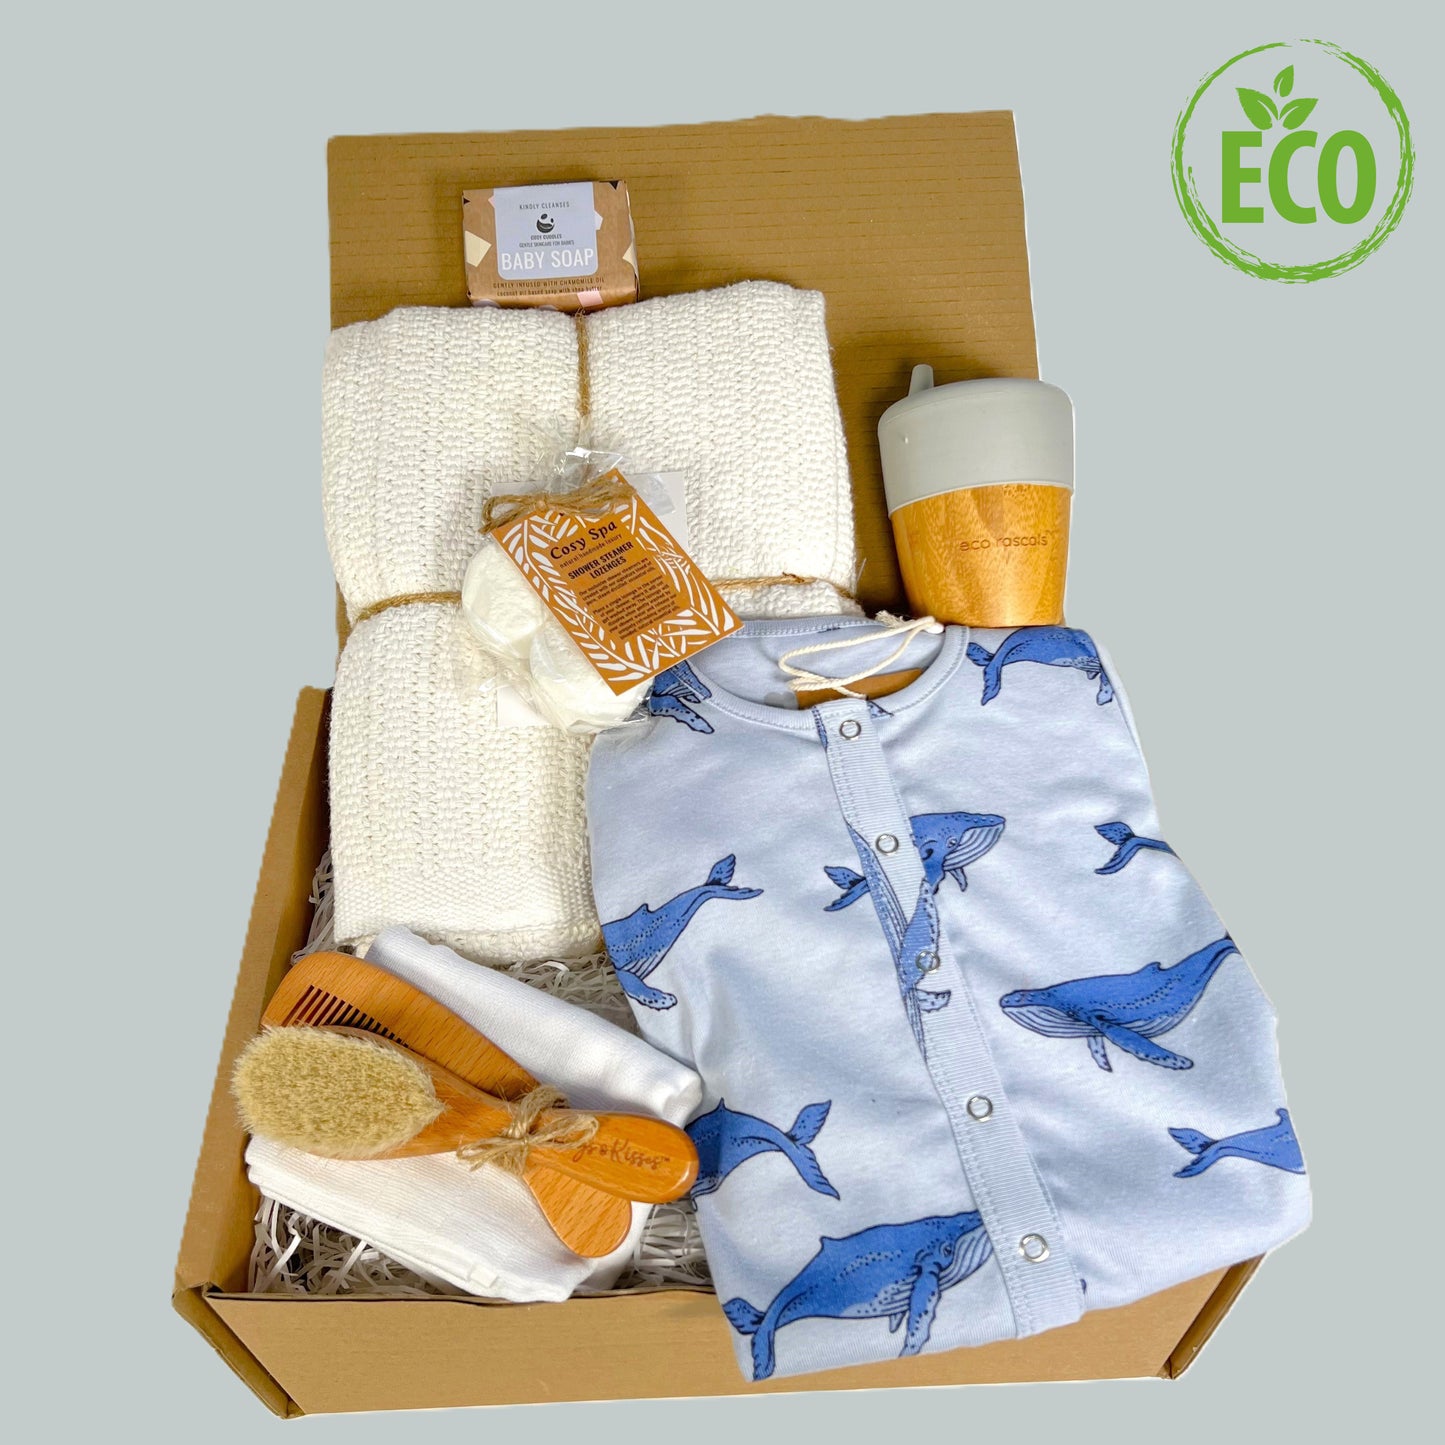 This eco friendly new parents gift has a GOTS certified blue whale print baby romper, a white cotton cellular baby blanket, a bamboo sippy cup by Eco Rascals, a wooden baby brush and comb set, a white muslin square and a pack of spa steamers with refined essential oils.